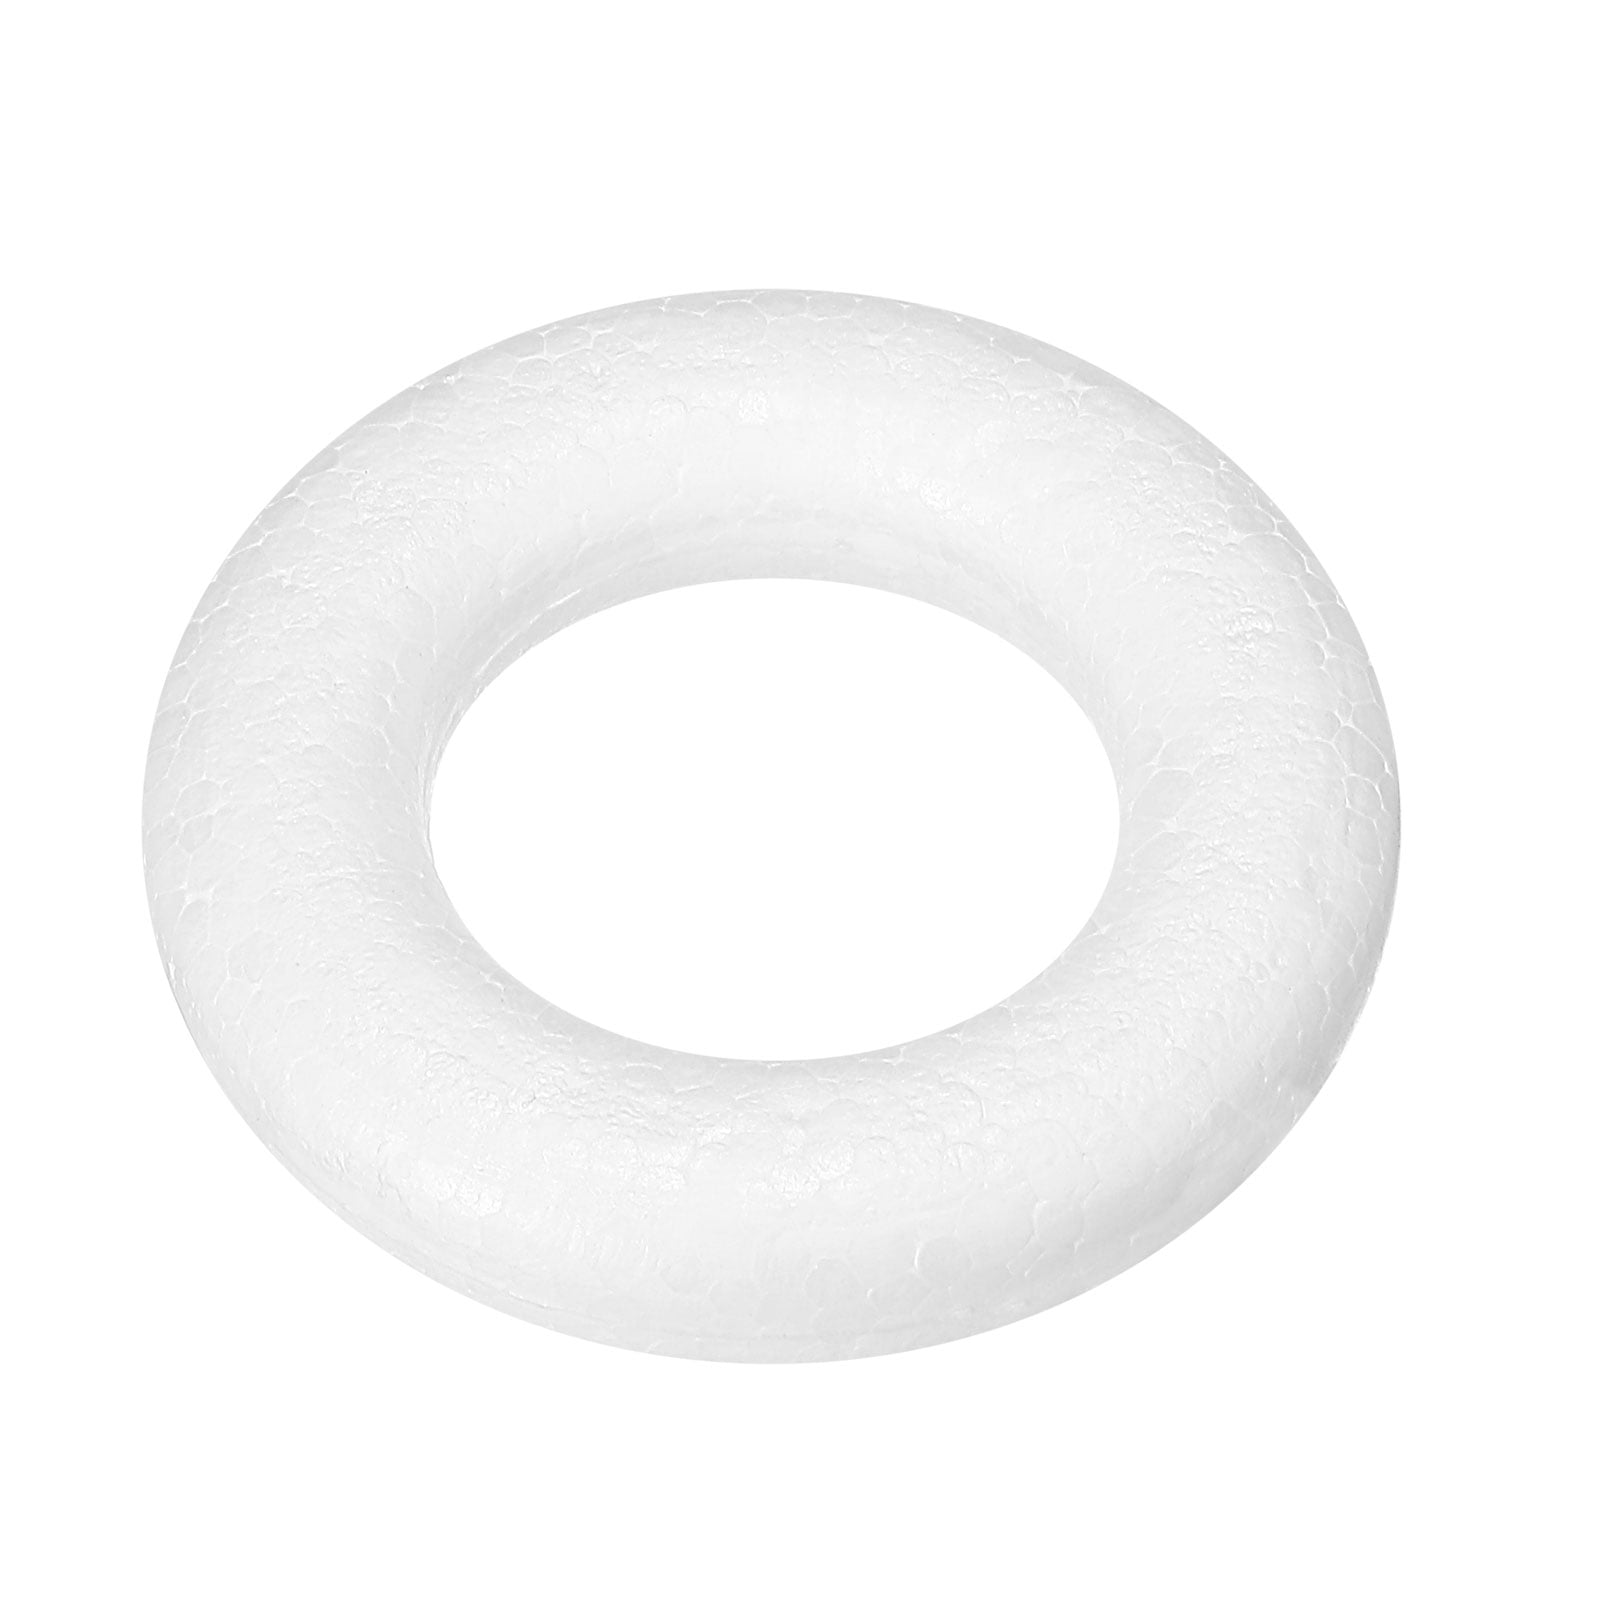 1.6 Inch Foam Wreath Forms Round Craft Rings for DIY Art Crafts Pack of 1 